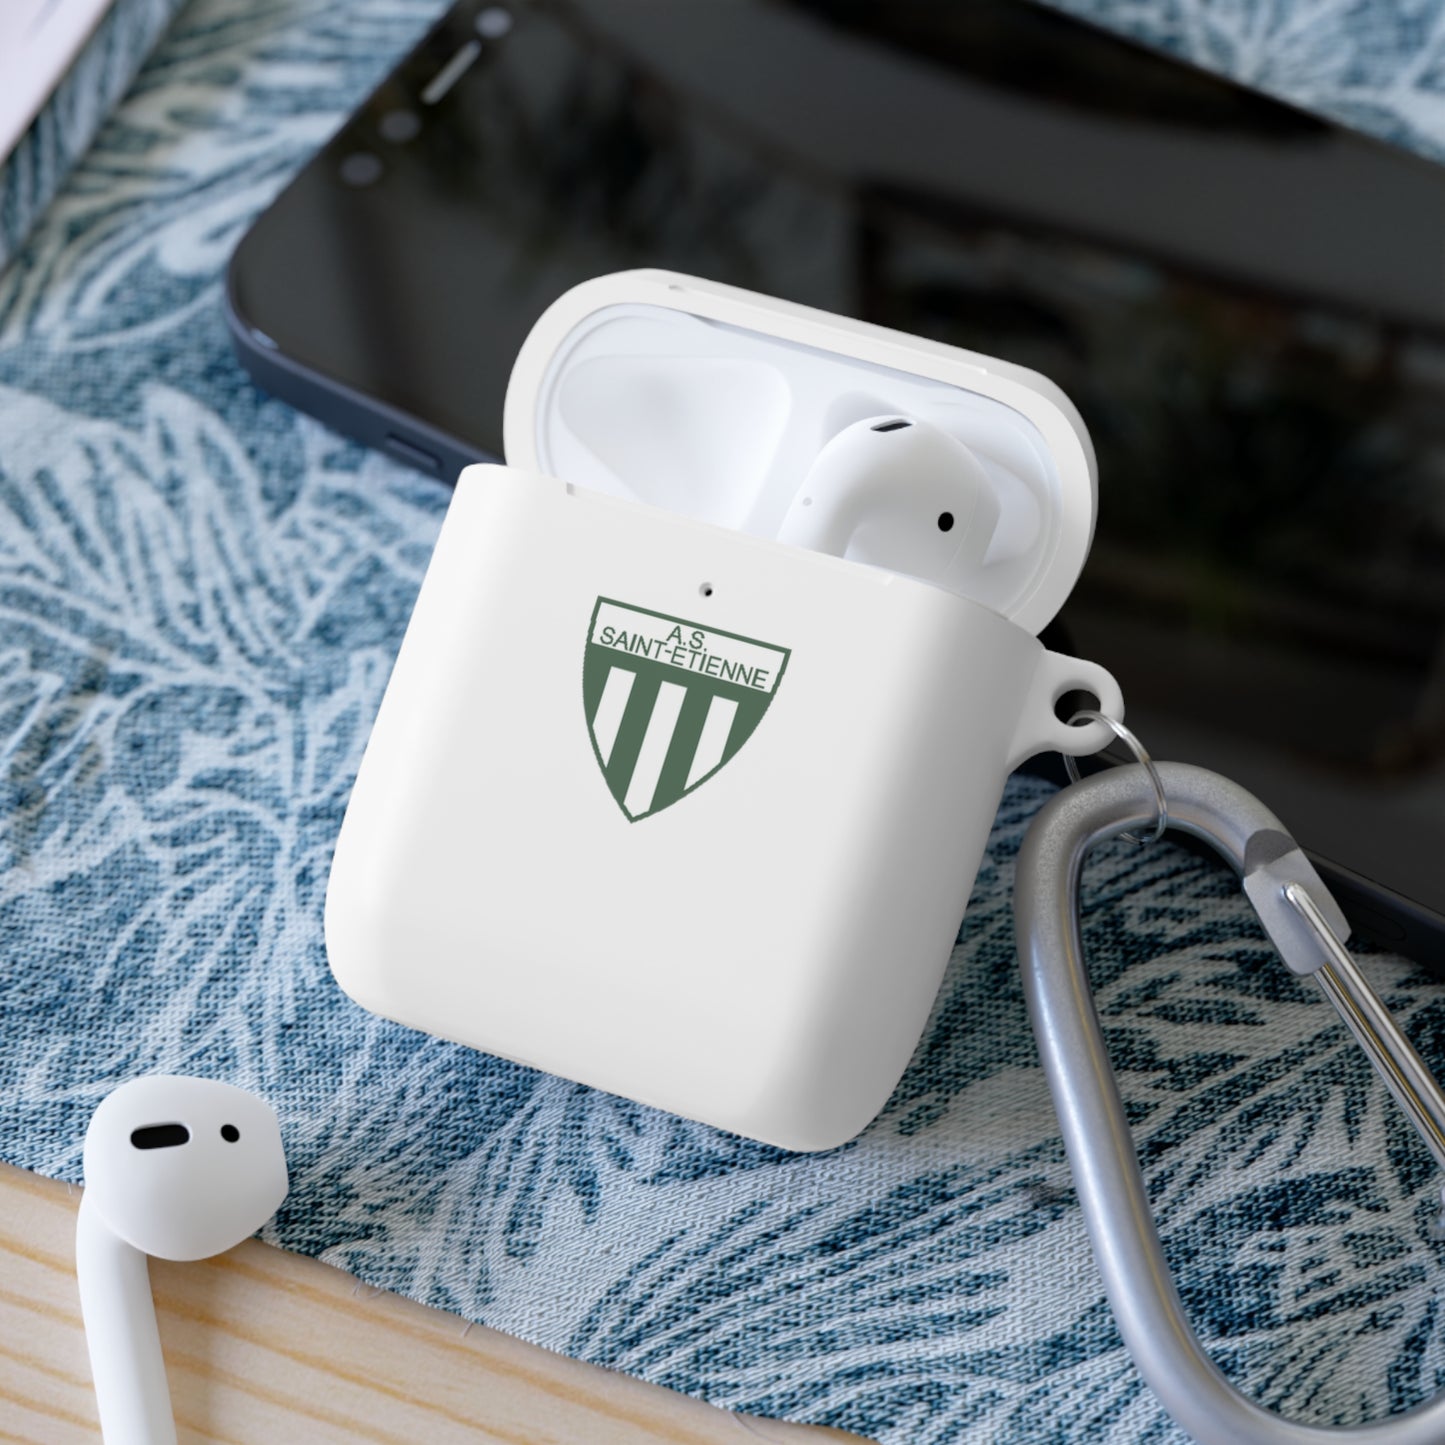 AS Saint-Etienne (logo of 70's) AirPods and AirPods Pro Case Cover